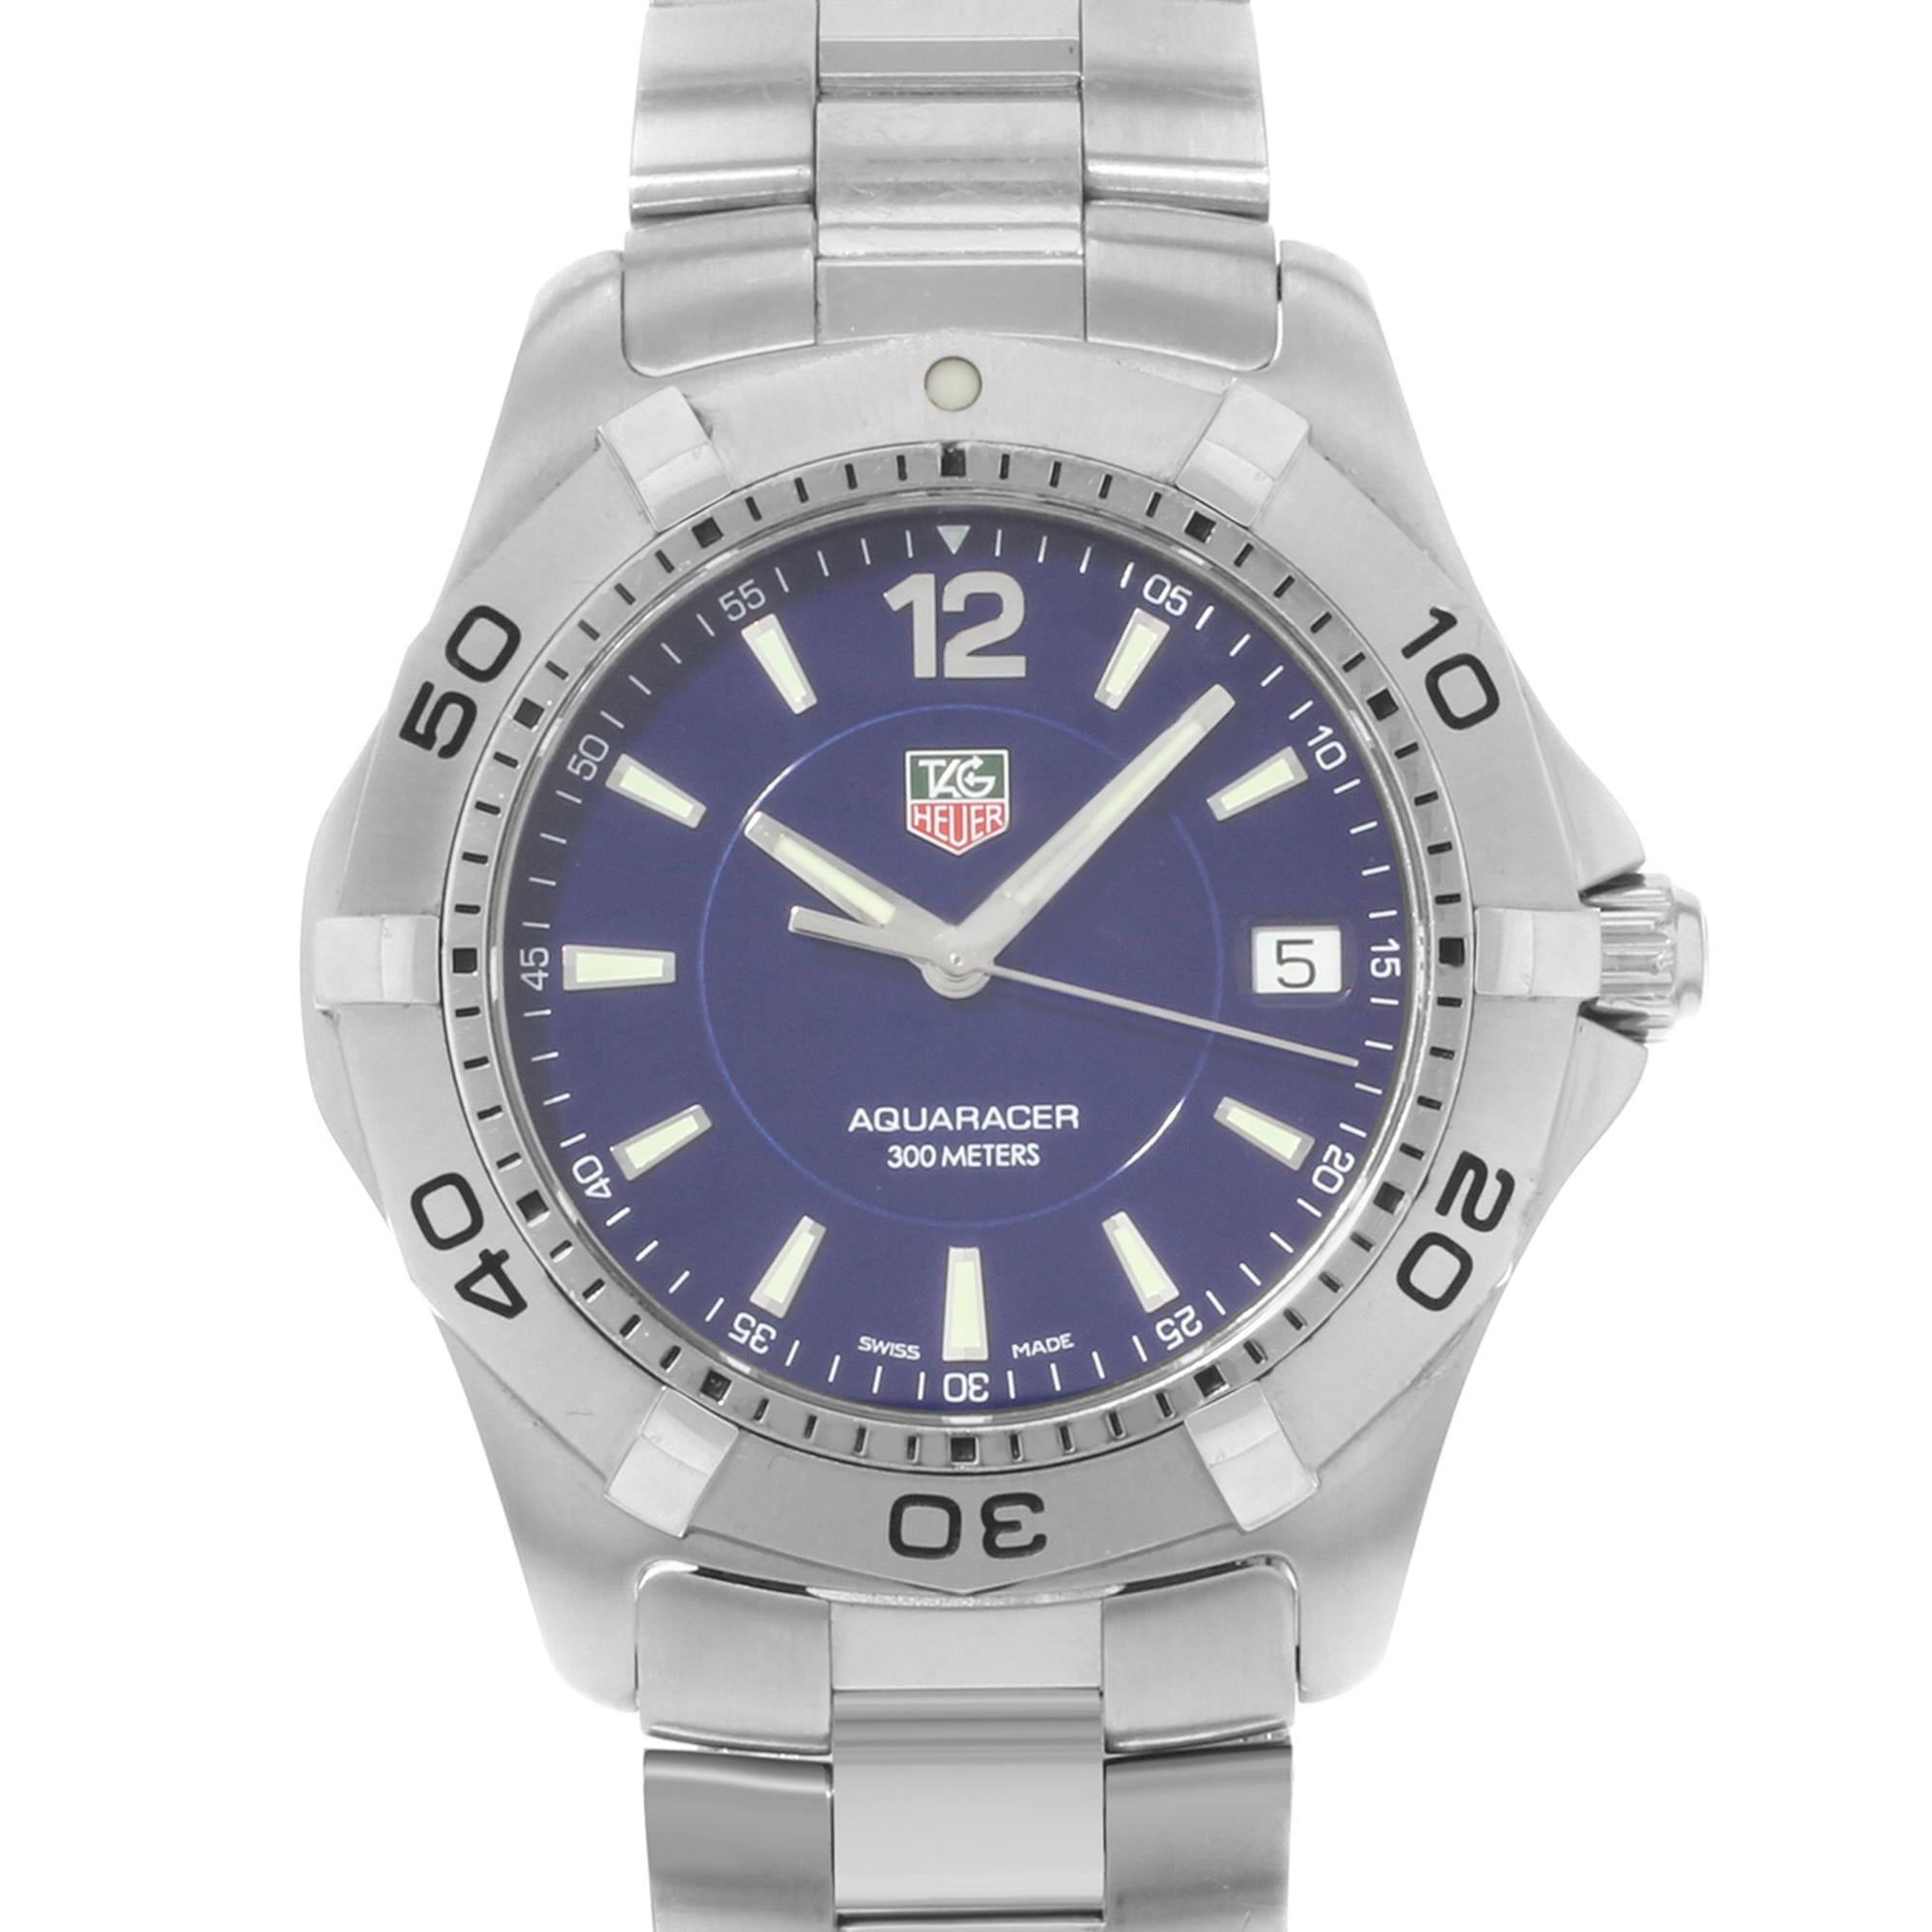 This pre-owned TAG Heuer Aquaracer  WAF1113.BA0801 is a beautiful men's timepiece that is powered by quartz (battery) movement which is cased in a stainless steel case. It has a round shape face, date indicator dial and has hand sticks & numerals